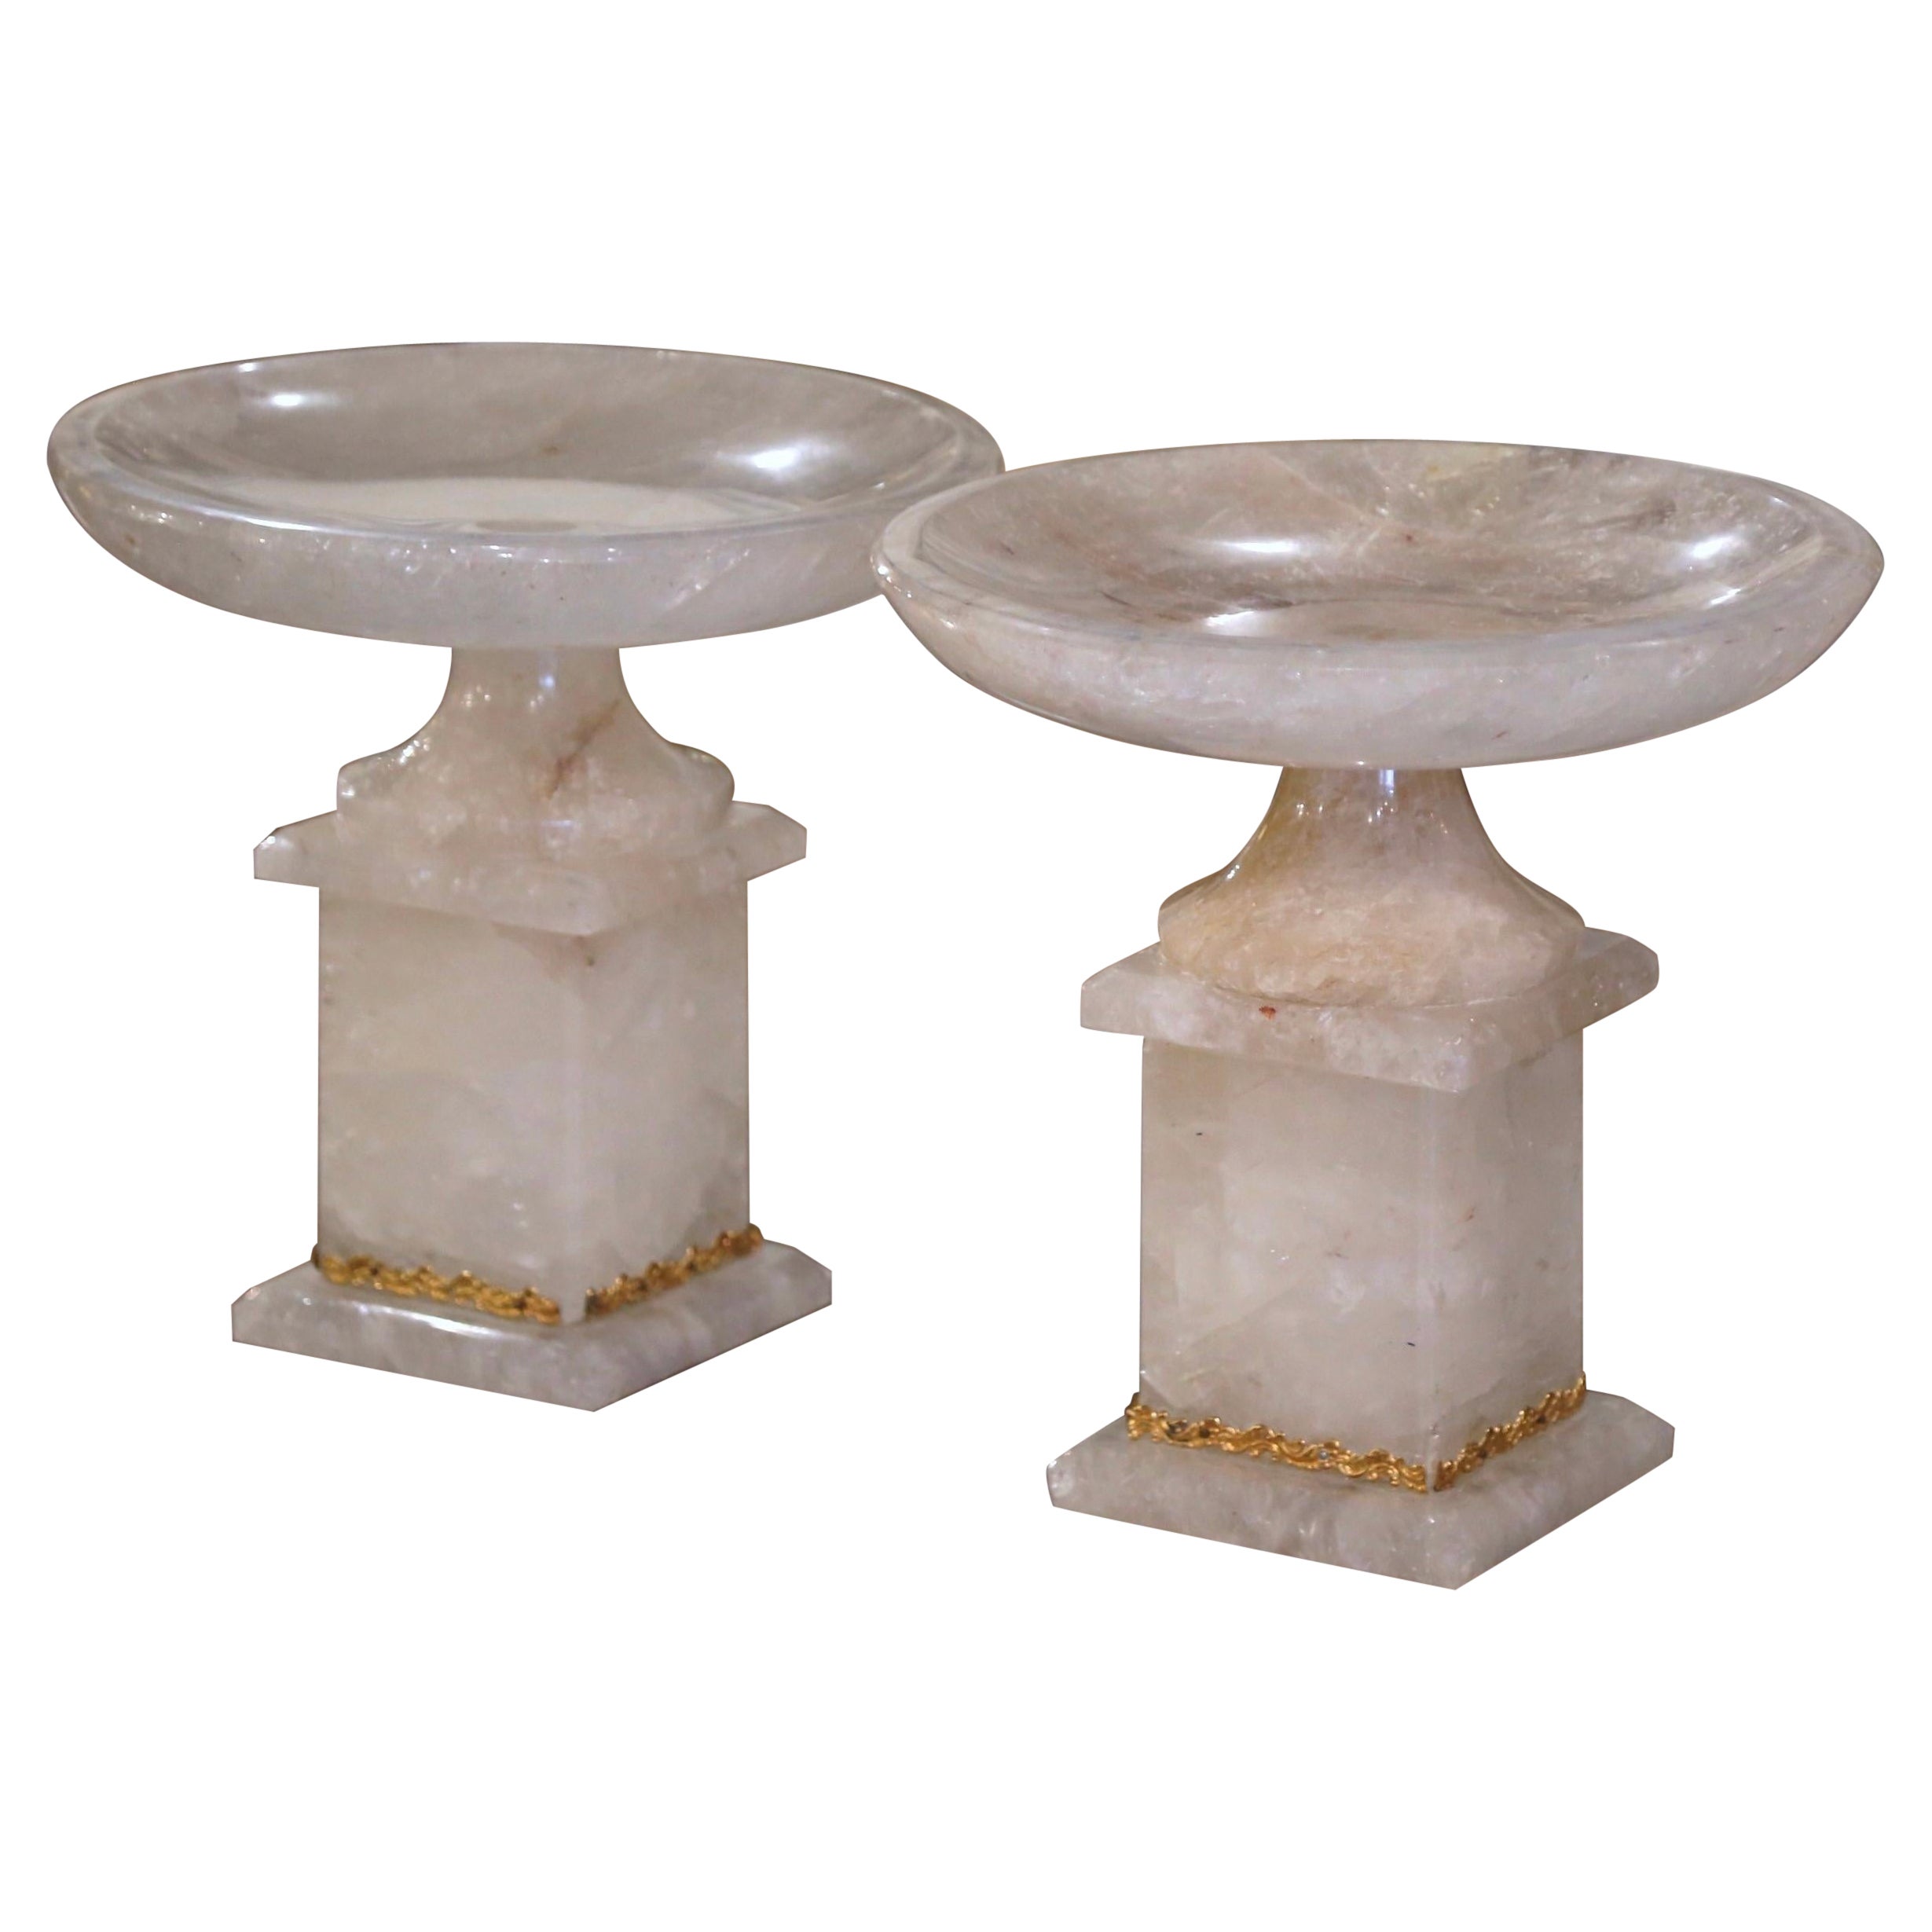  Pair of Brazilian Carved Rock Crystal Compote Centerpiece with Swivel Bowl